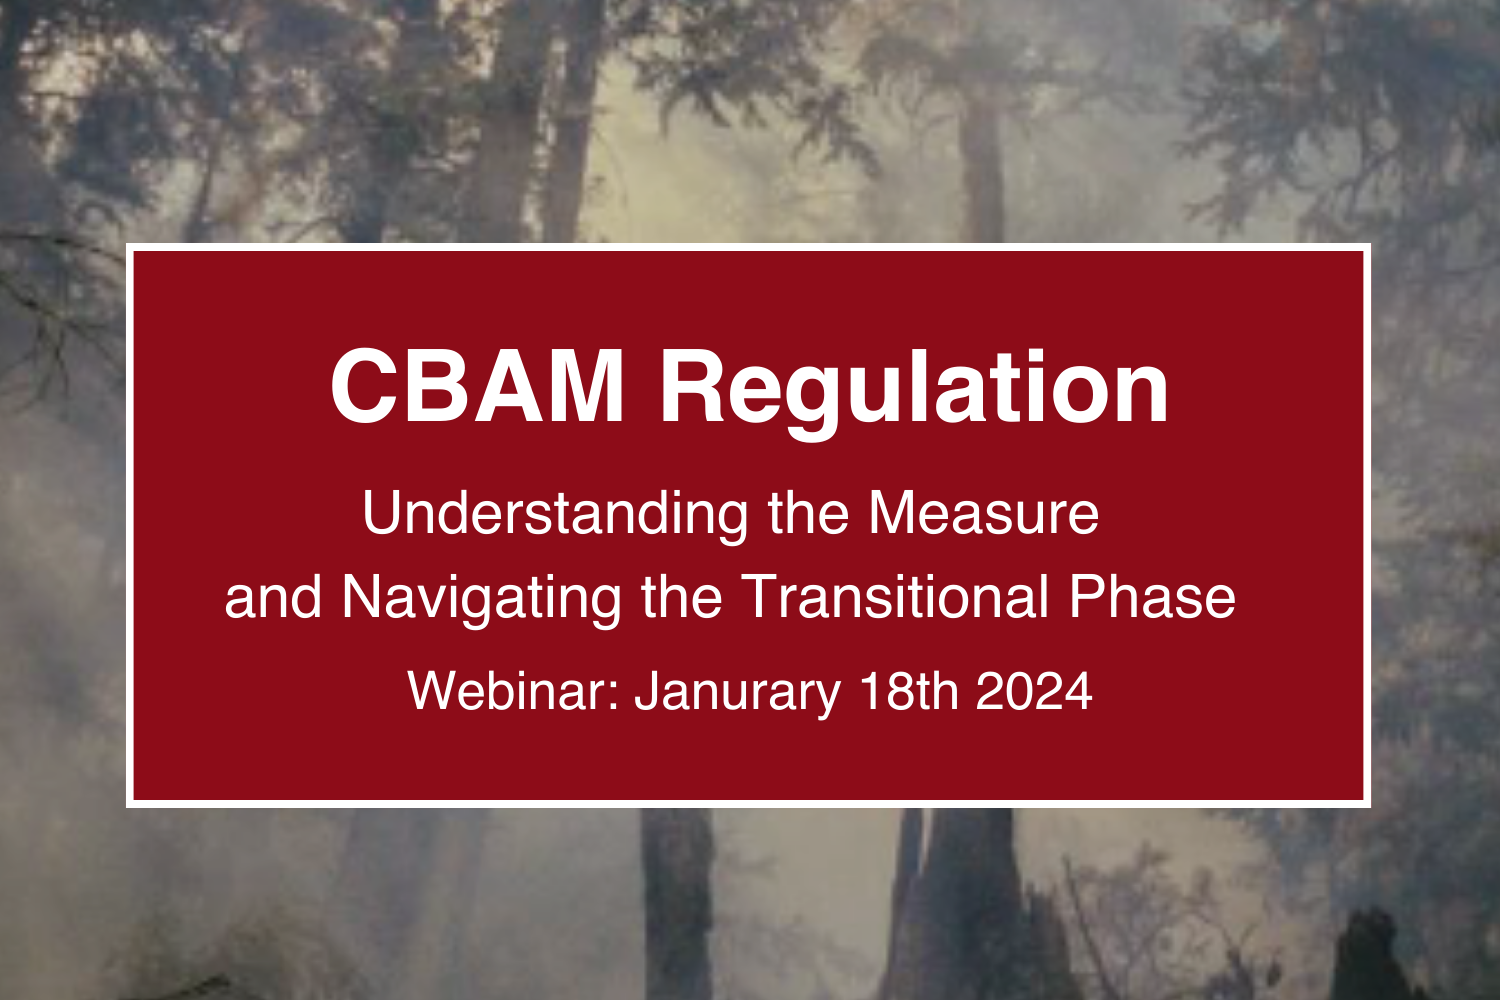 Webinar: CBAM Regulation – Understanding the Measure and Navigating the Transitional Phase